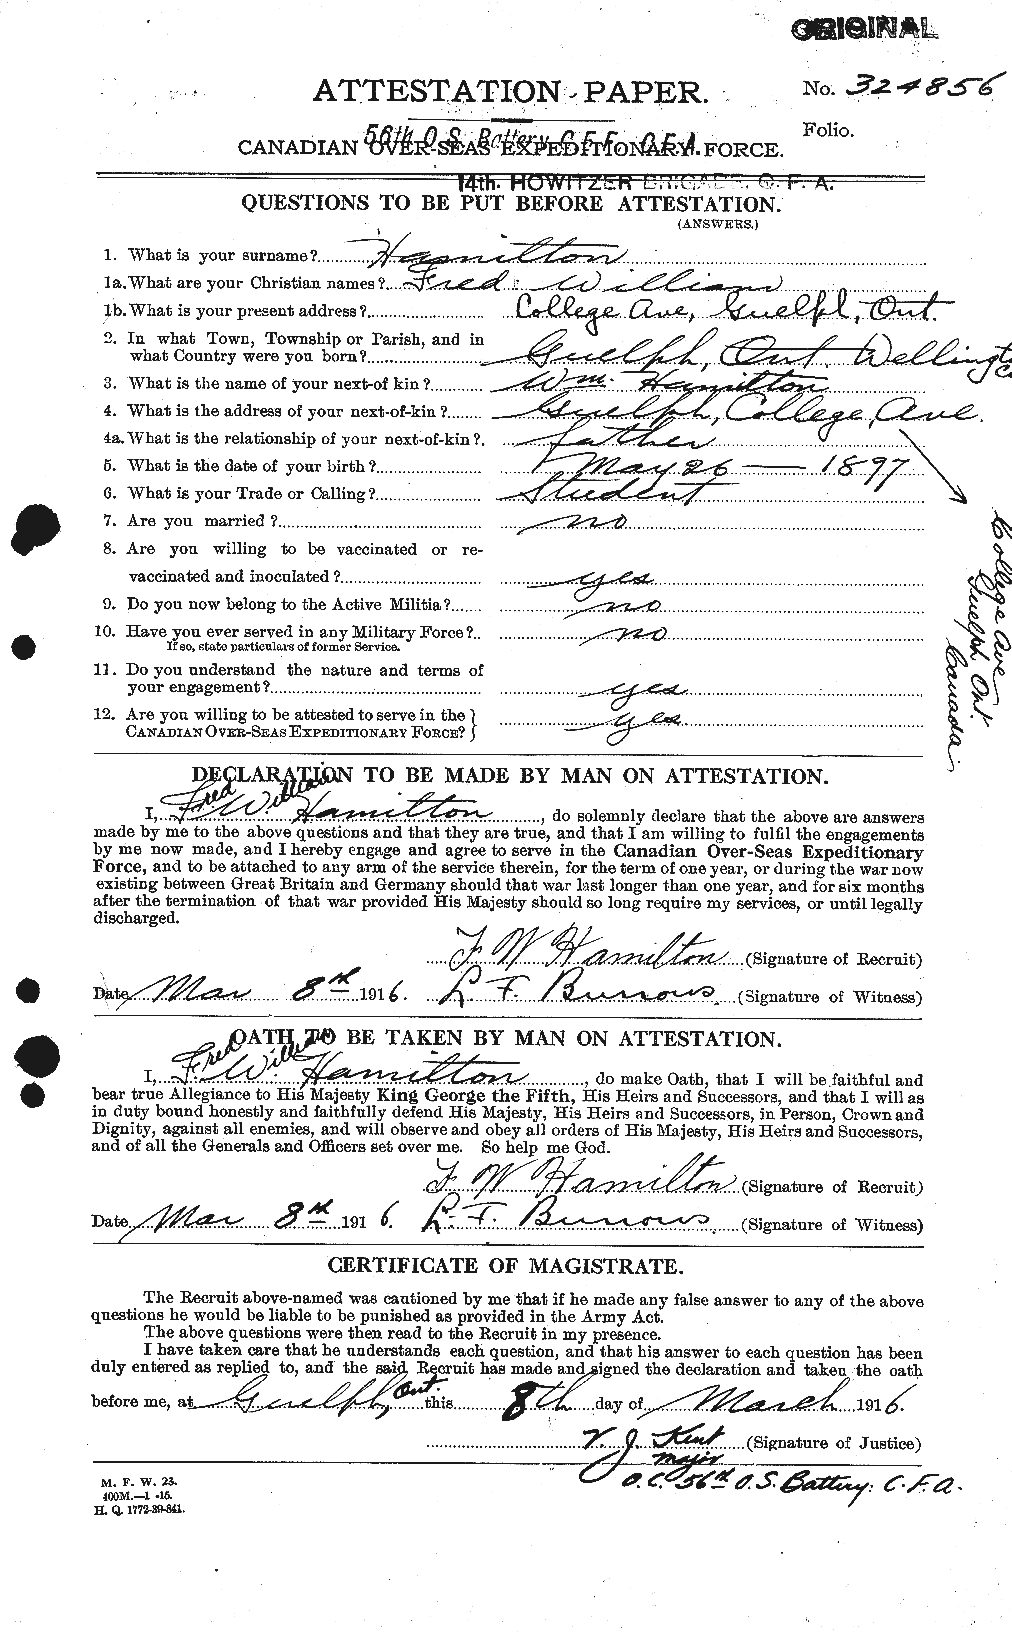 Personnel Records of the First World War - CEF 372400a